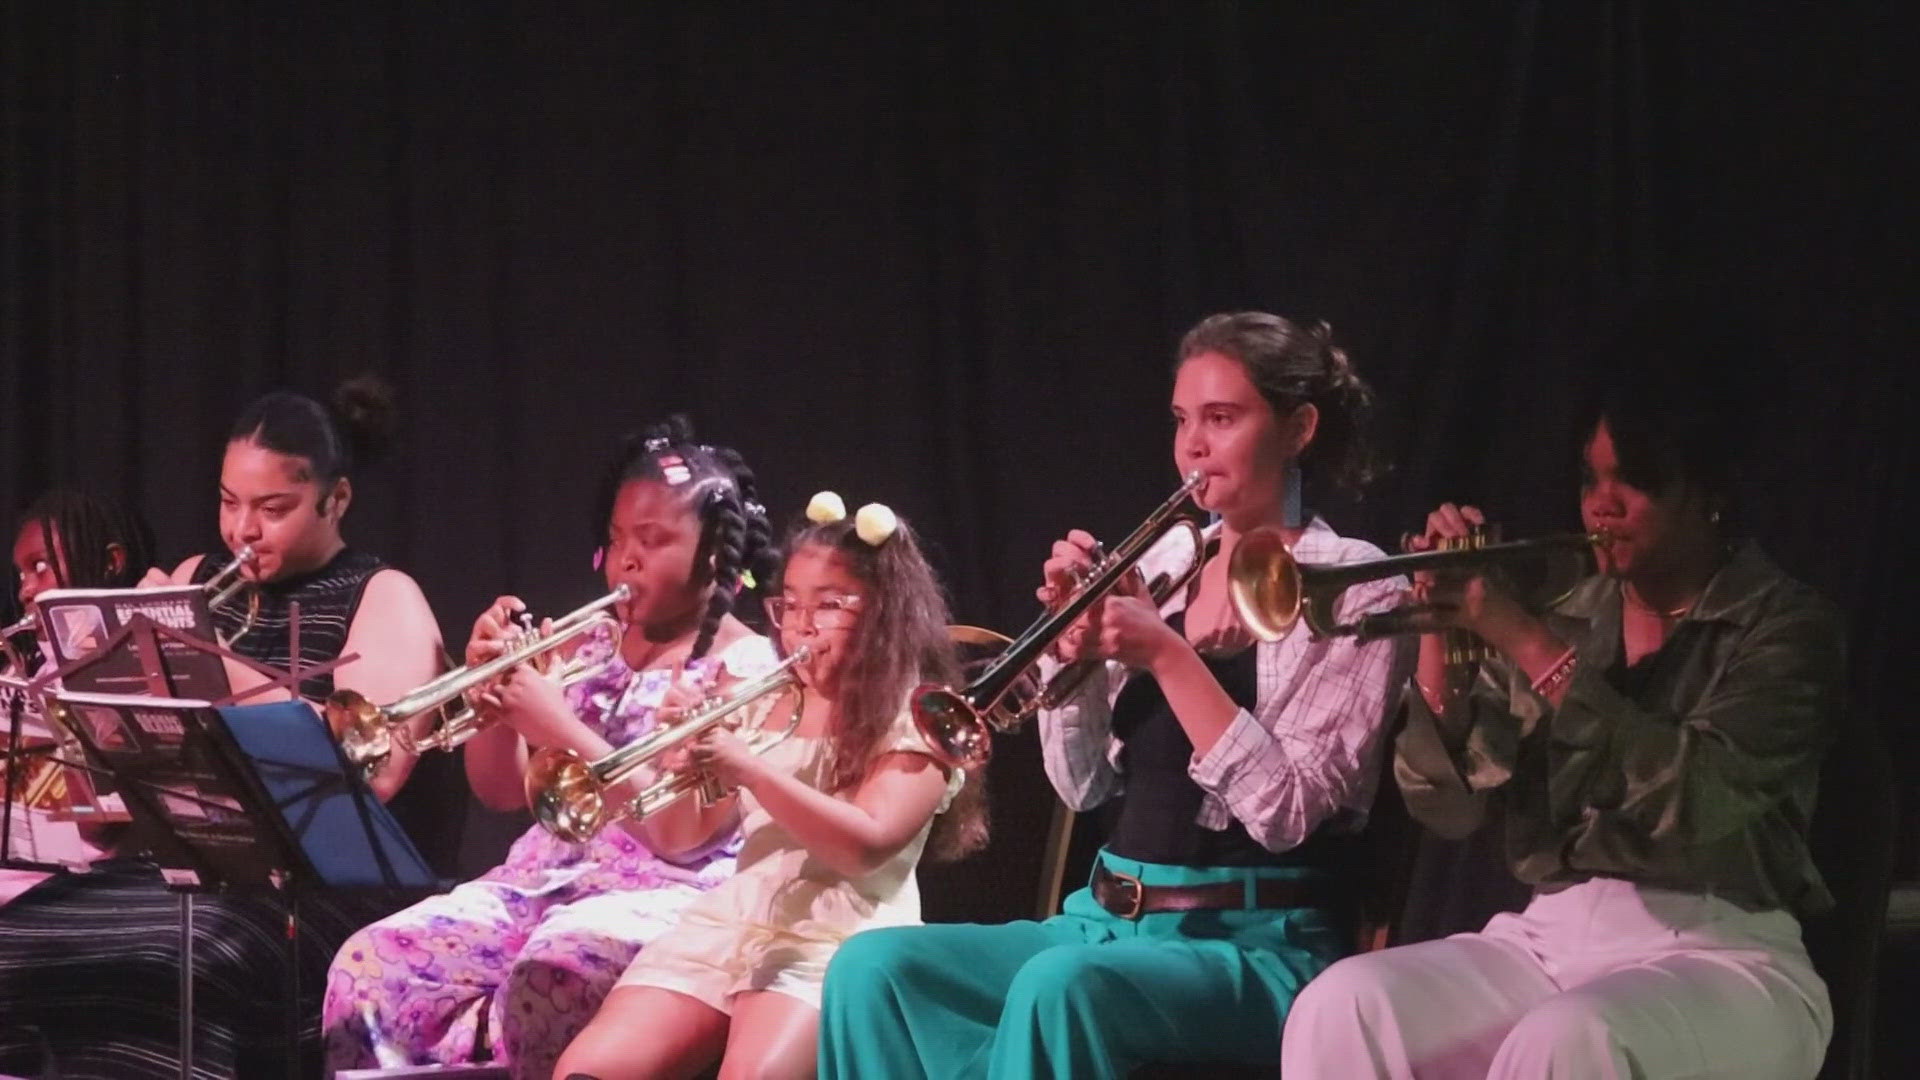 Troy Sawyer founded Girls Play Trumpets Too, a space for girls to learn an instrument predominately played by boys.